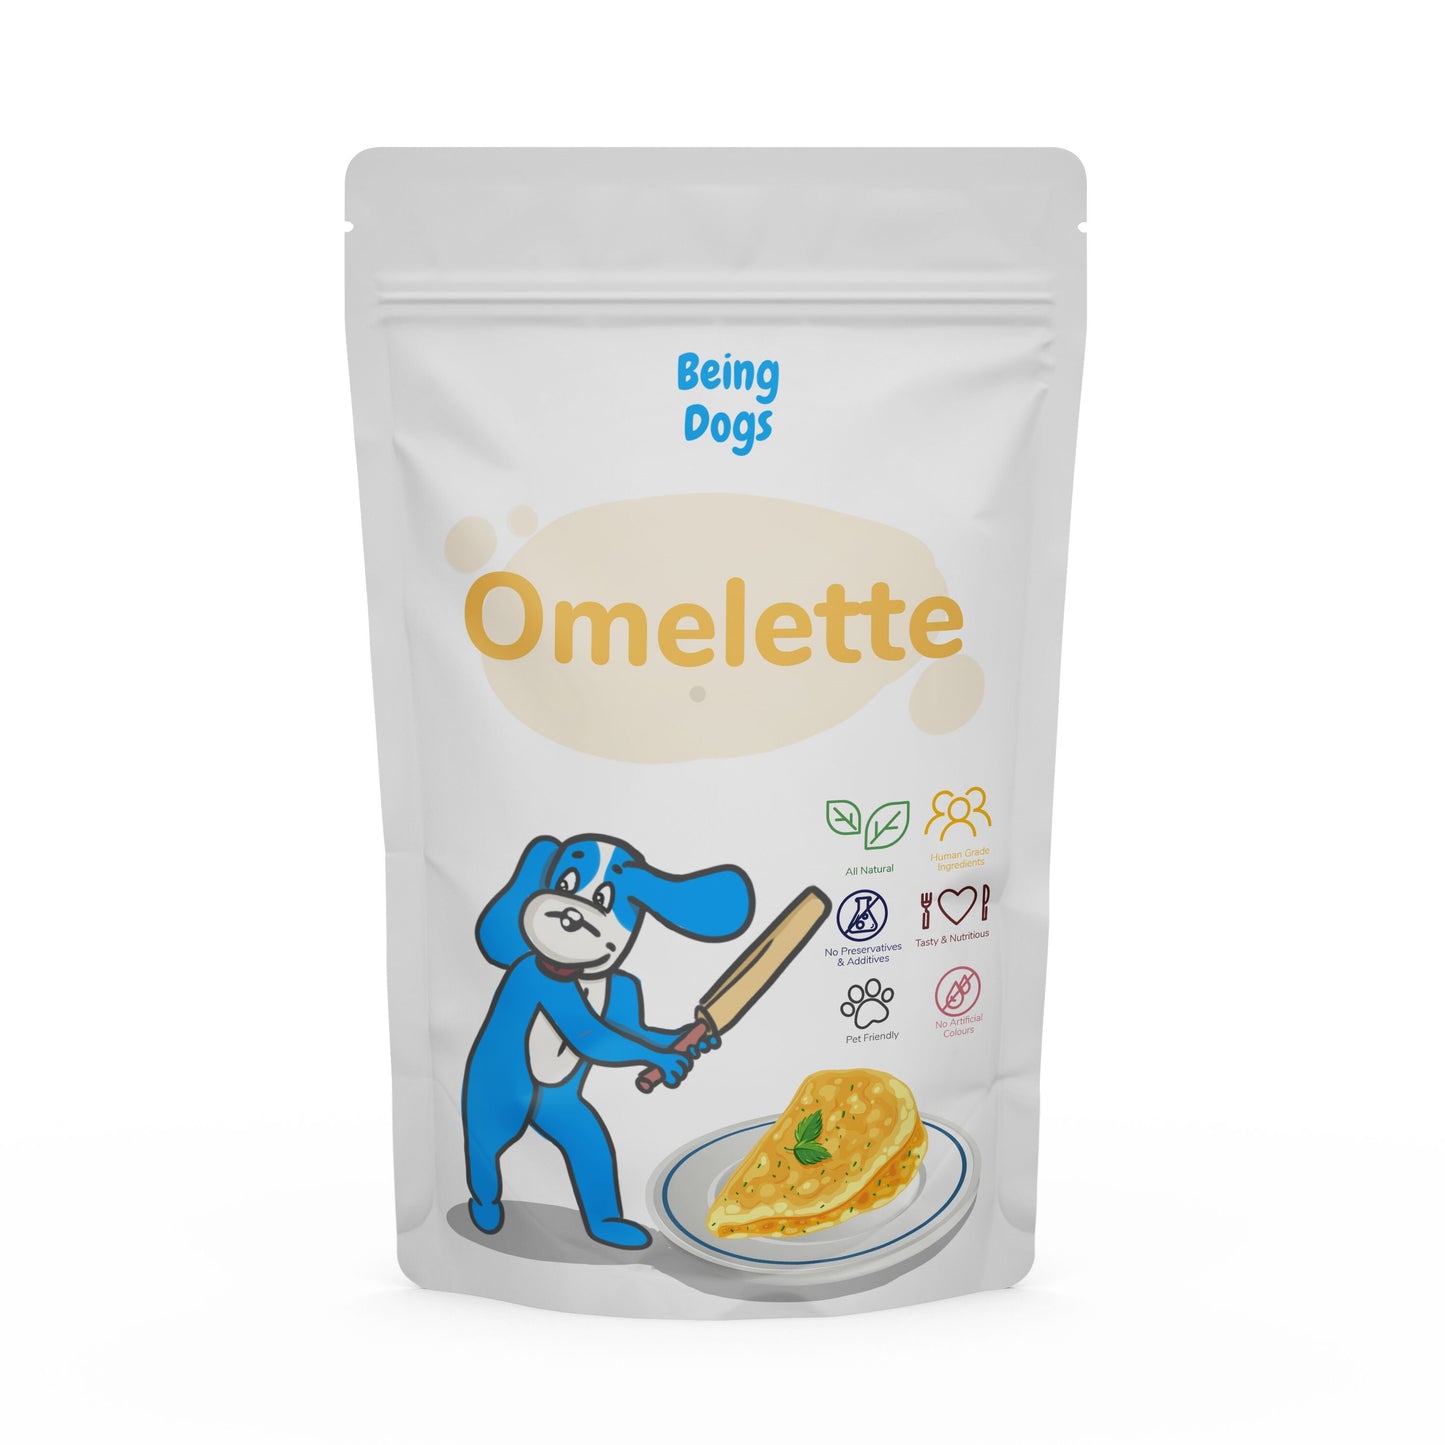 Omelette Meal For Dogs (Single Packet), Customised, Made Fresh Daily, Zero Preservatives, High In Protein